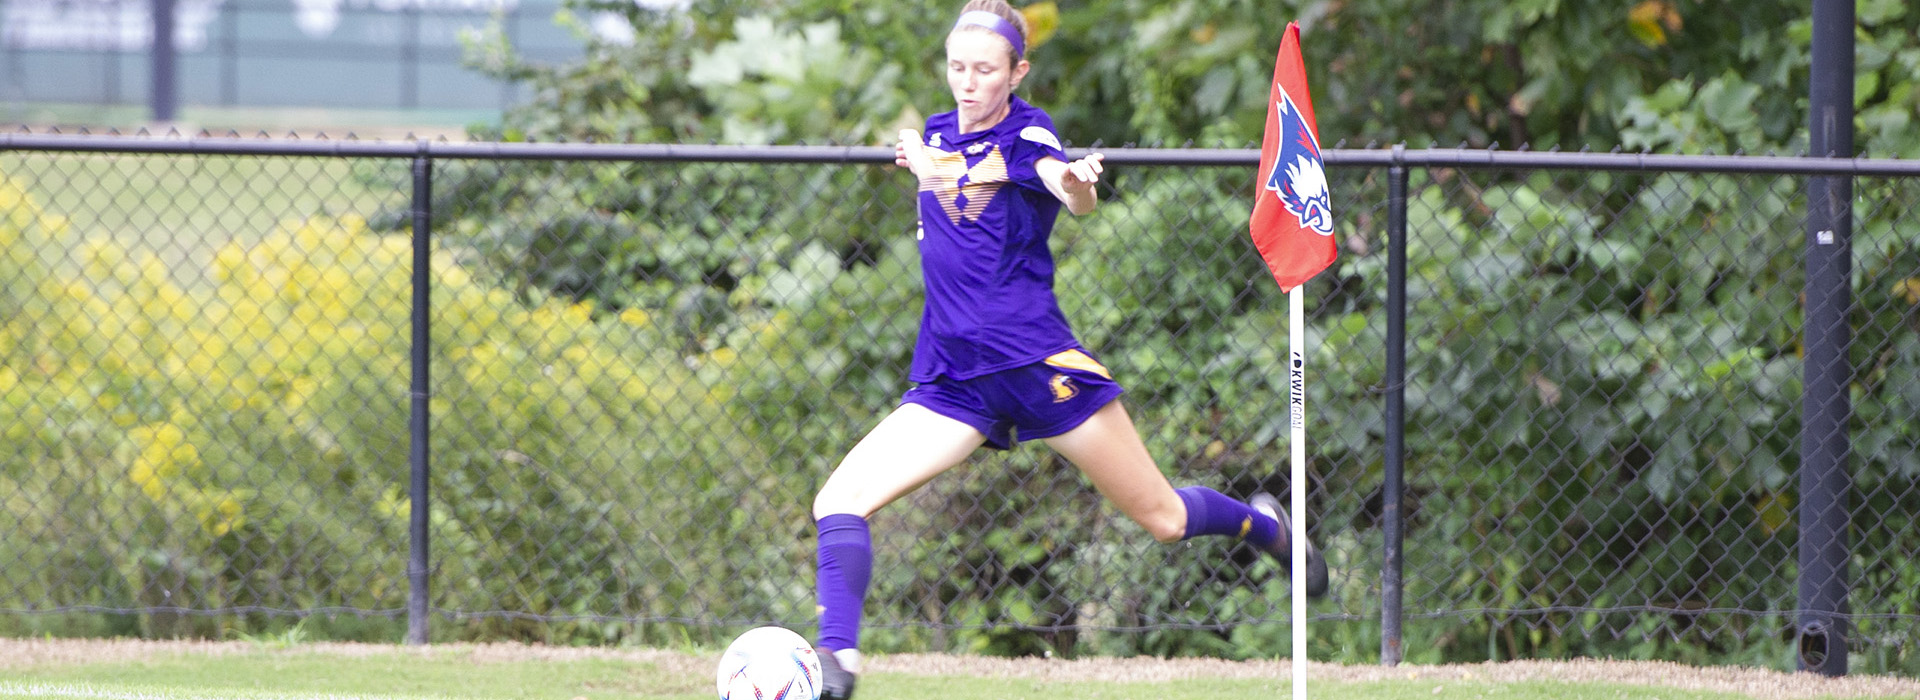 Tech soccer moves to 2-0 in league play behind 4-0 triumph at Southern Indiana